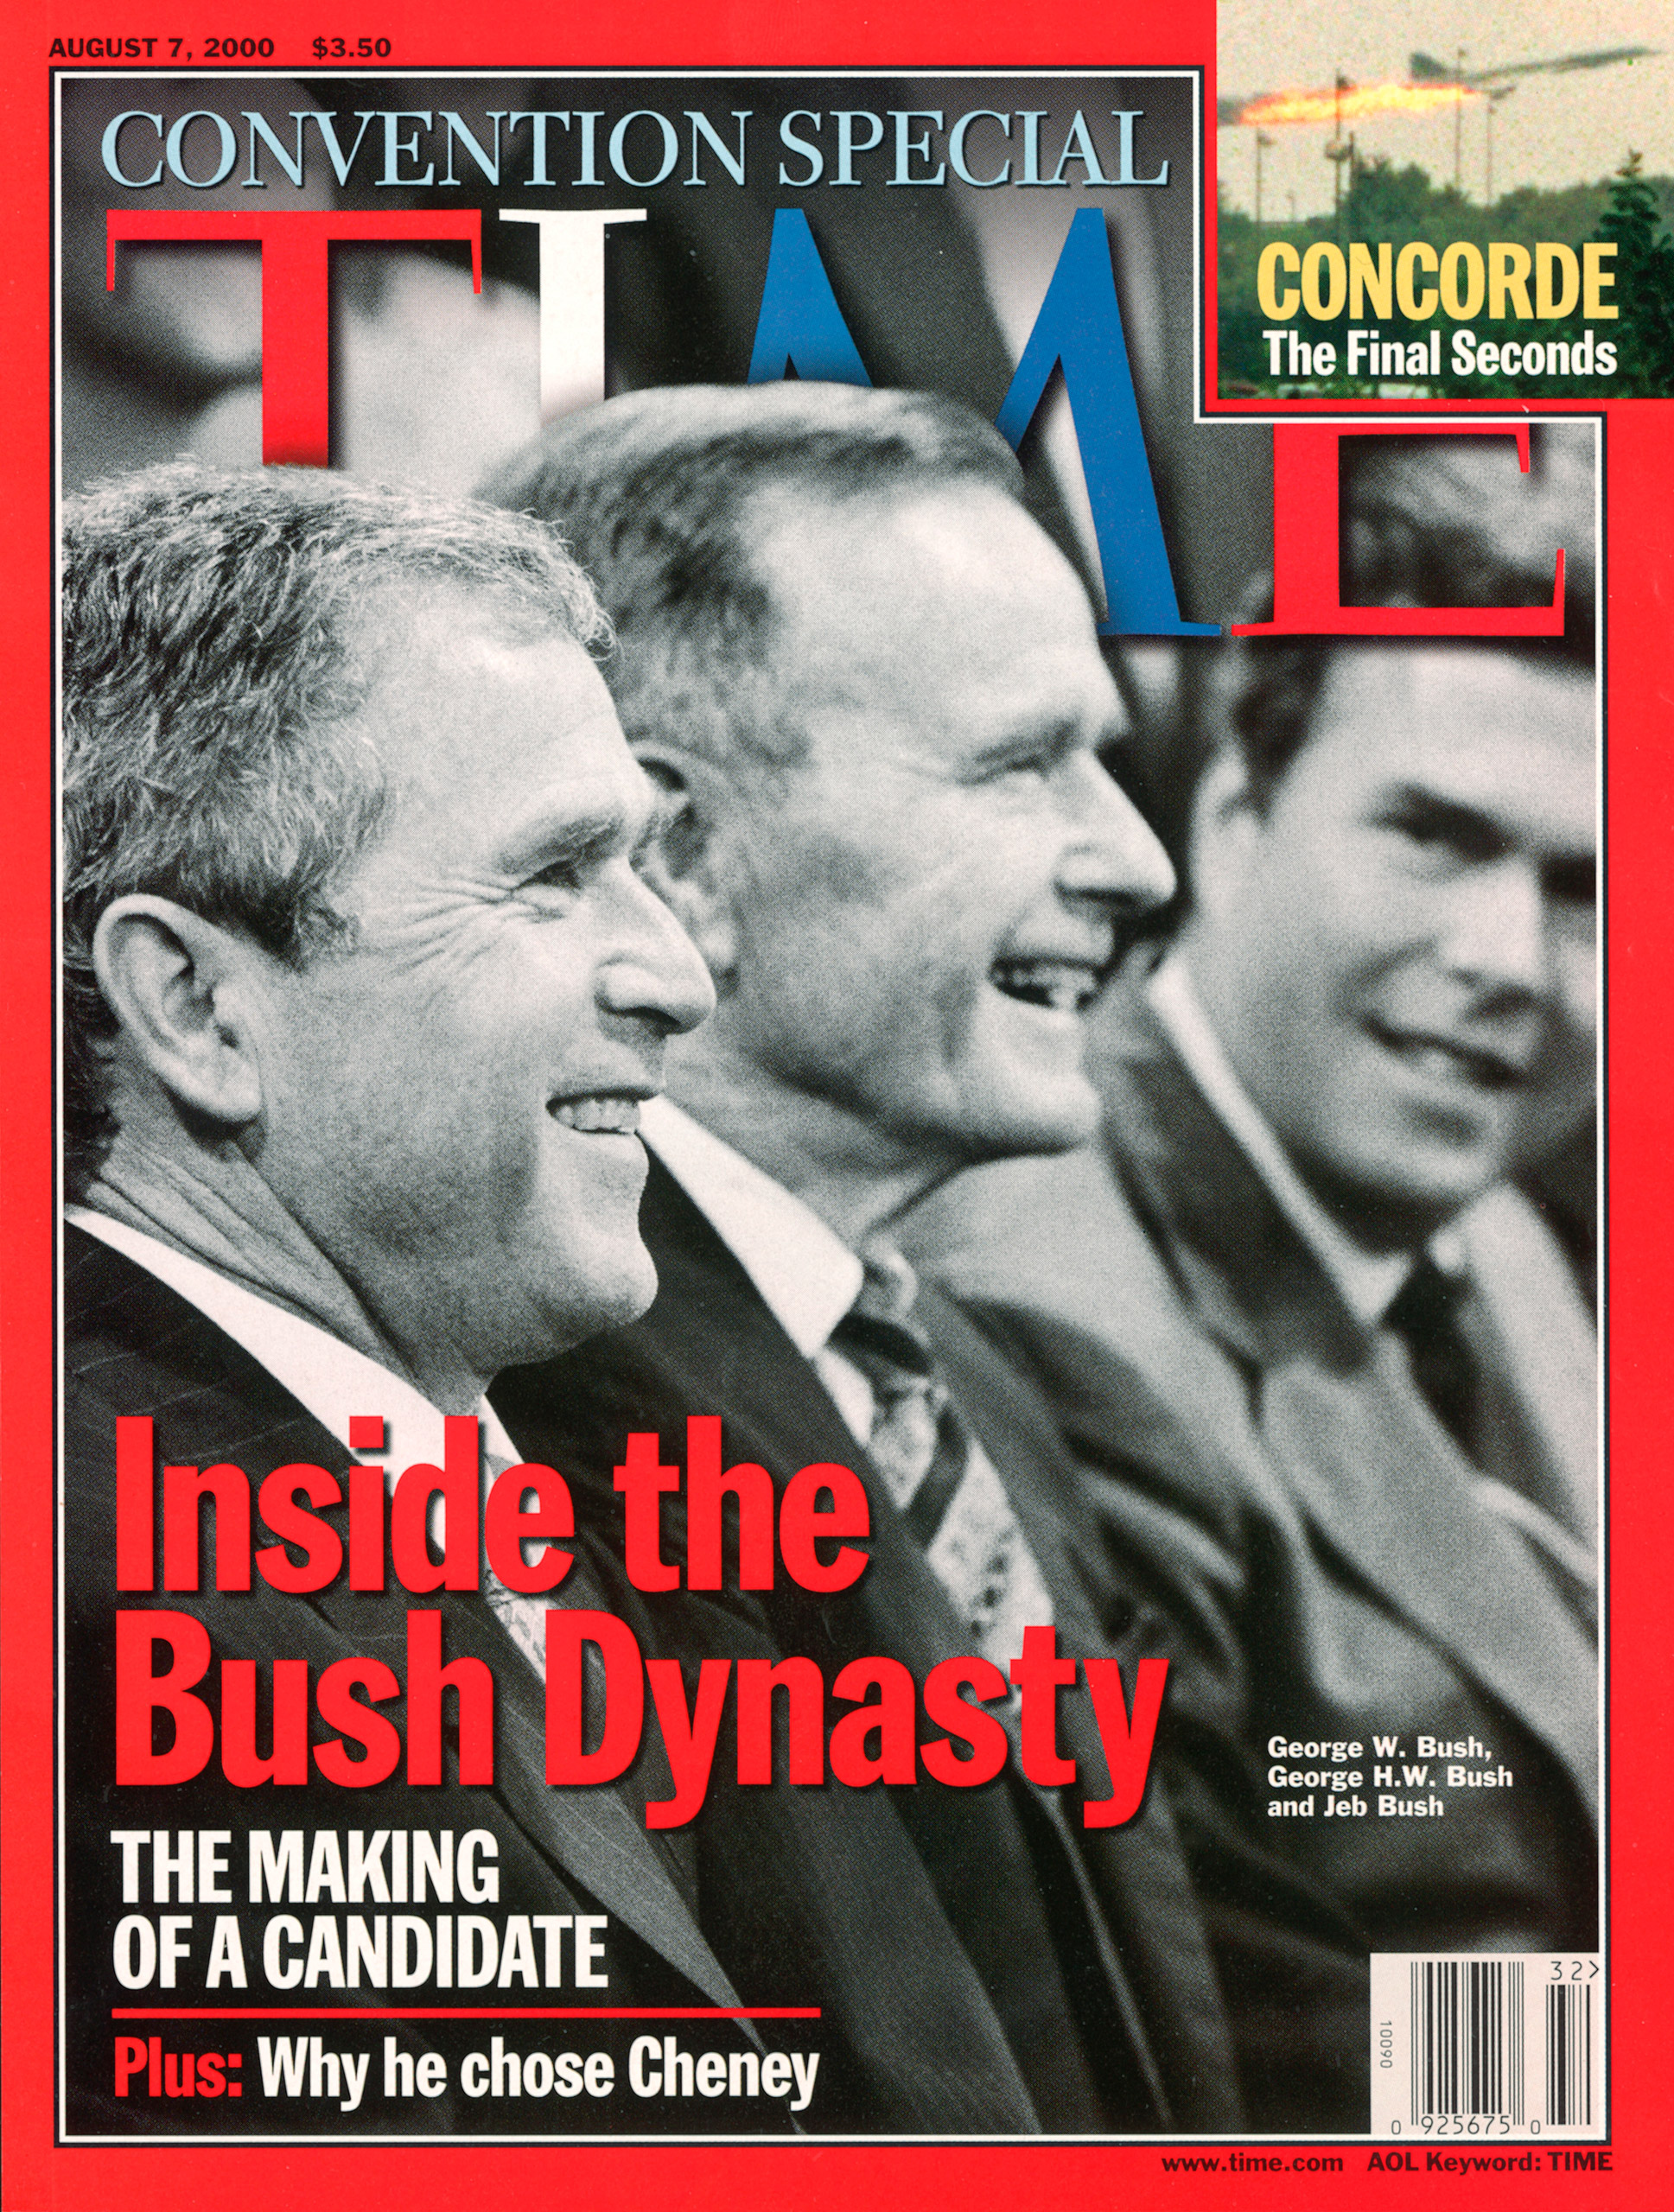 The 'Bush Dynasty' on the Aug. 7, 2000, cover of TIME.